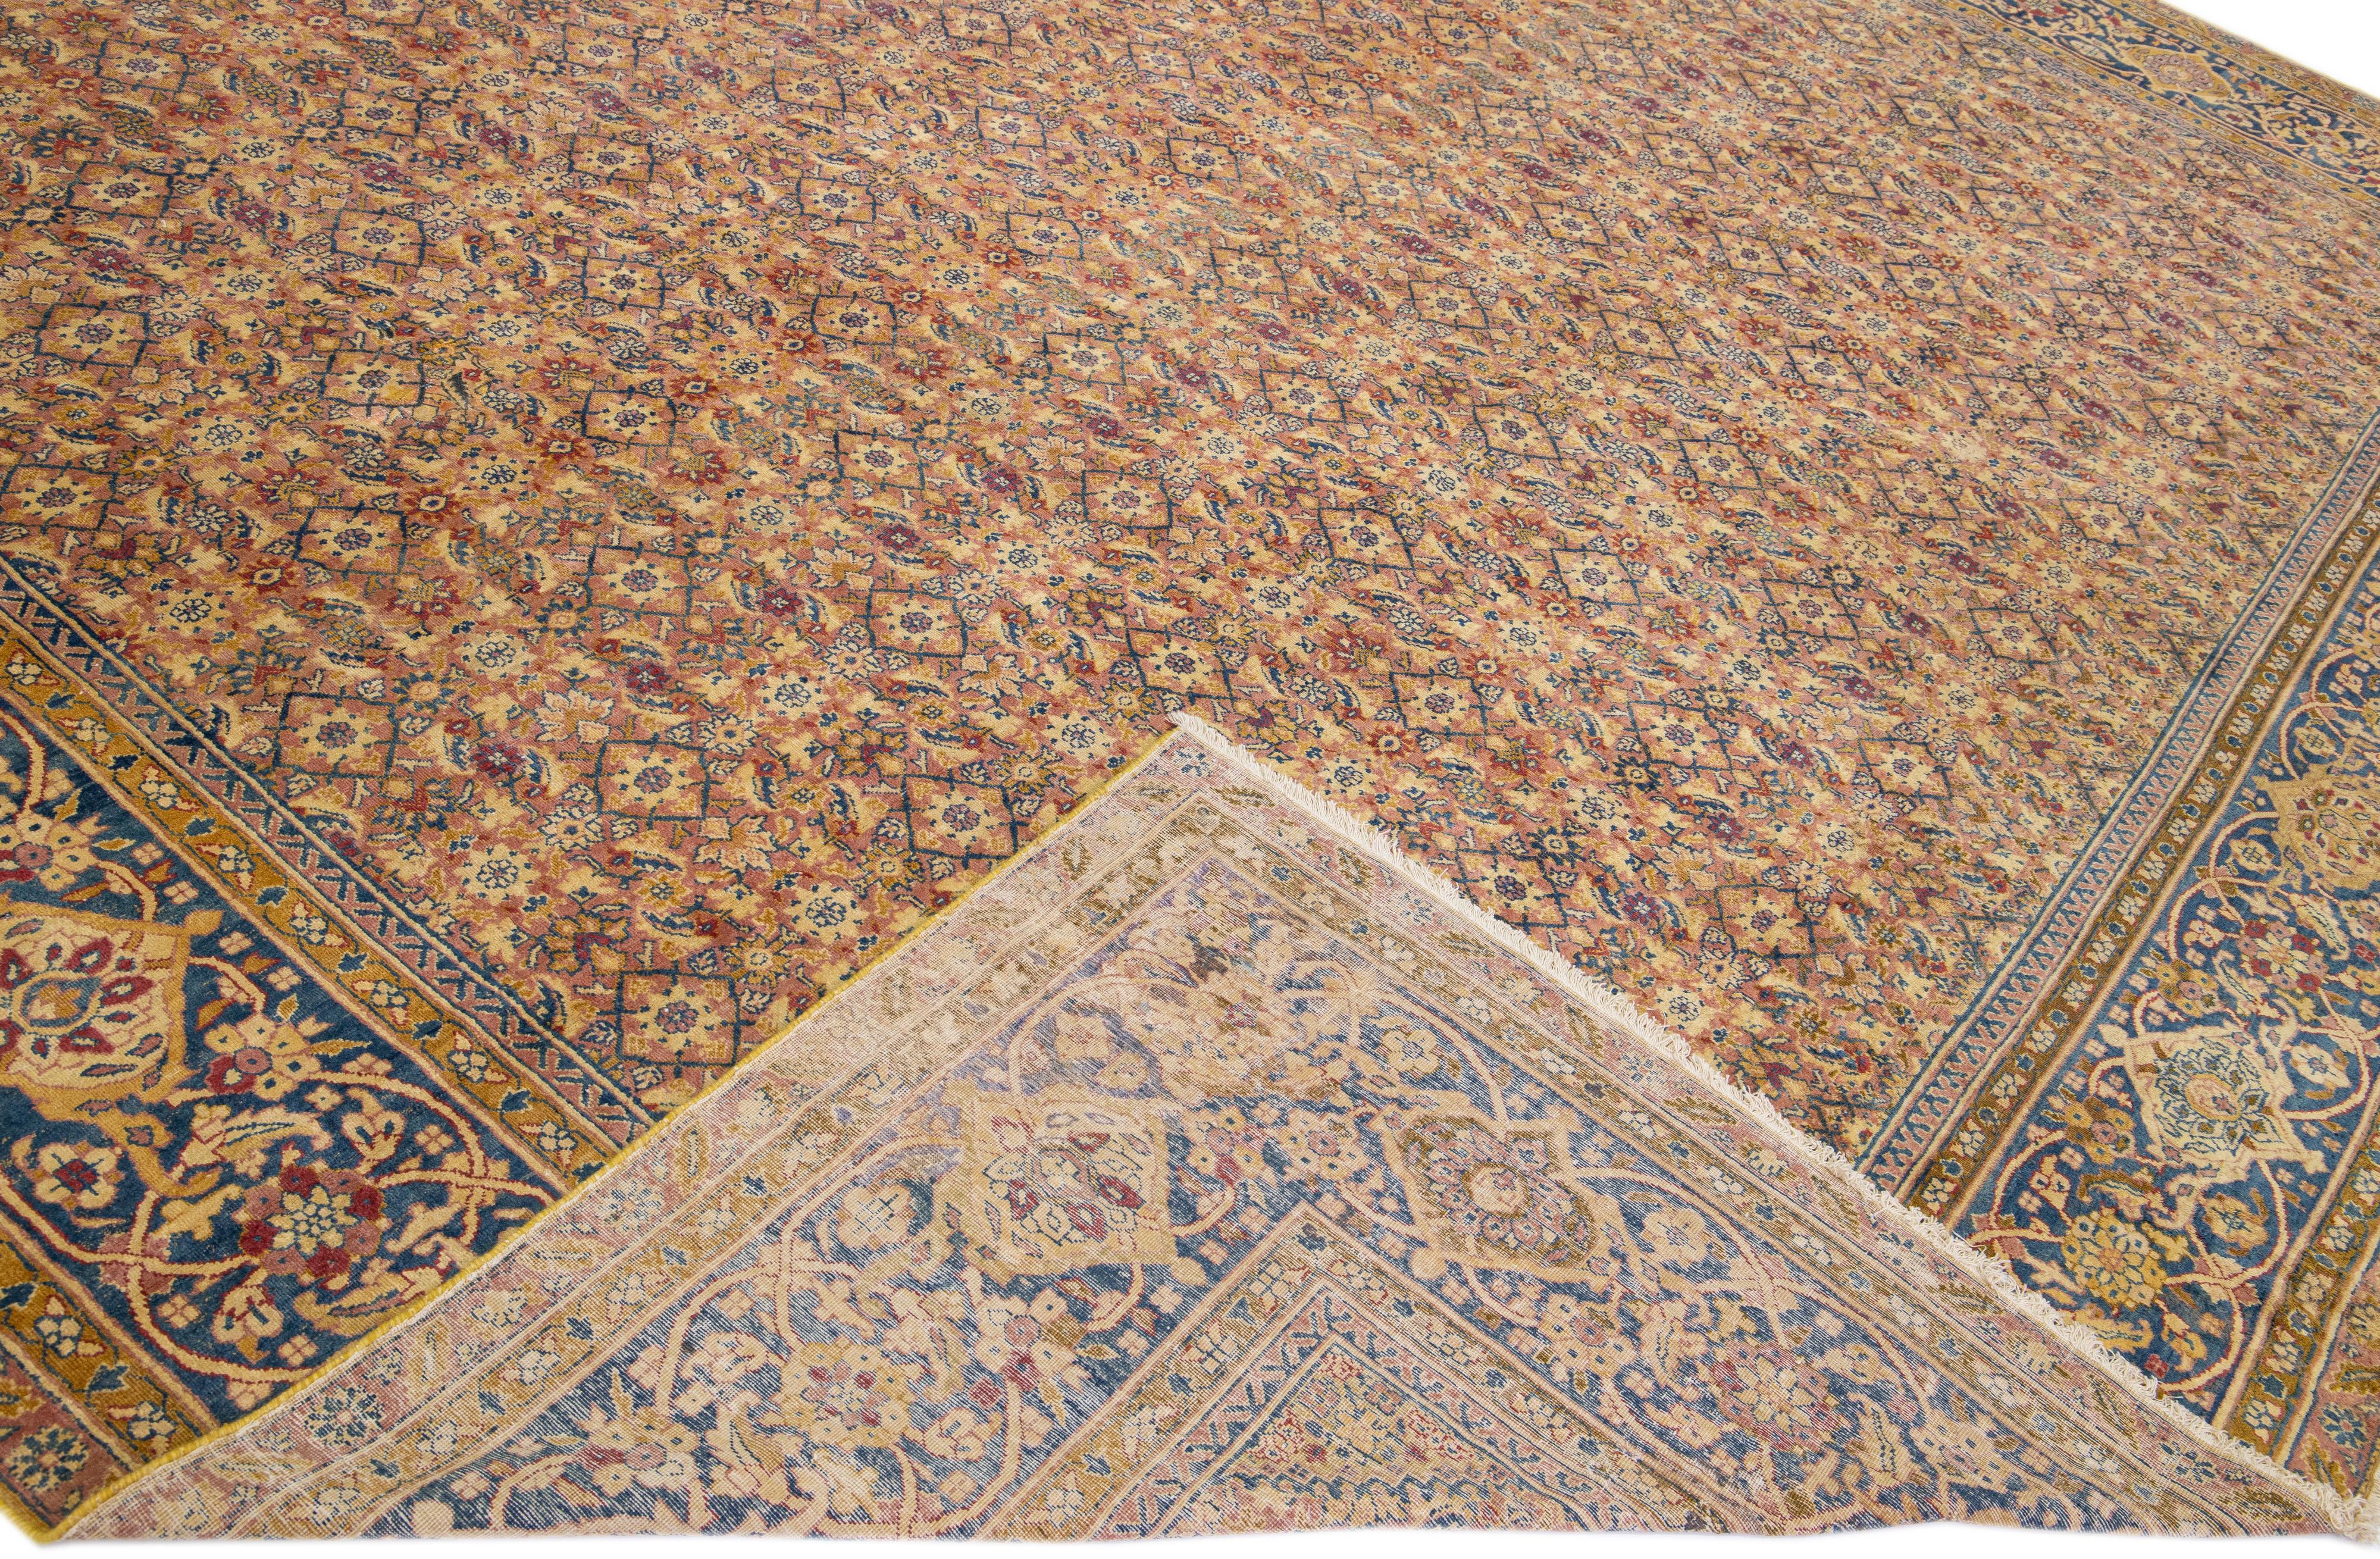 Beautiful antique Kerman hand-knotted wool rug with a tan field. This Persian rug has pink, blue, goldenrod, and red accents in a gorgeous all-over floral pattern design.

This rug measures: 14' x 18'.

Our rugs are professional cleaning before